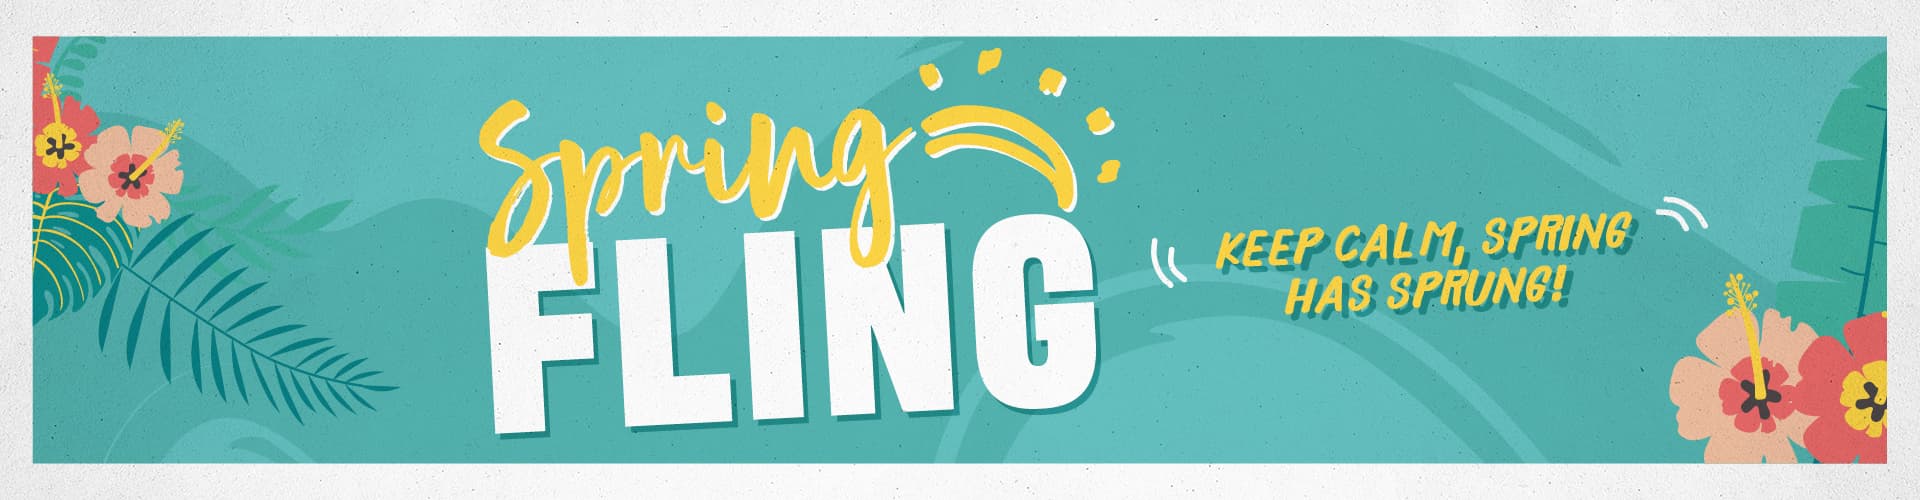 Spring Fling - Offers on Food and Drink this Spring